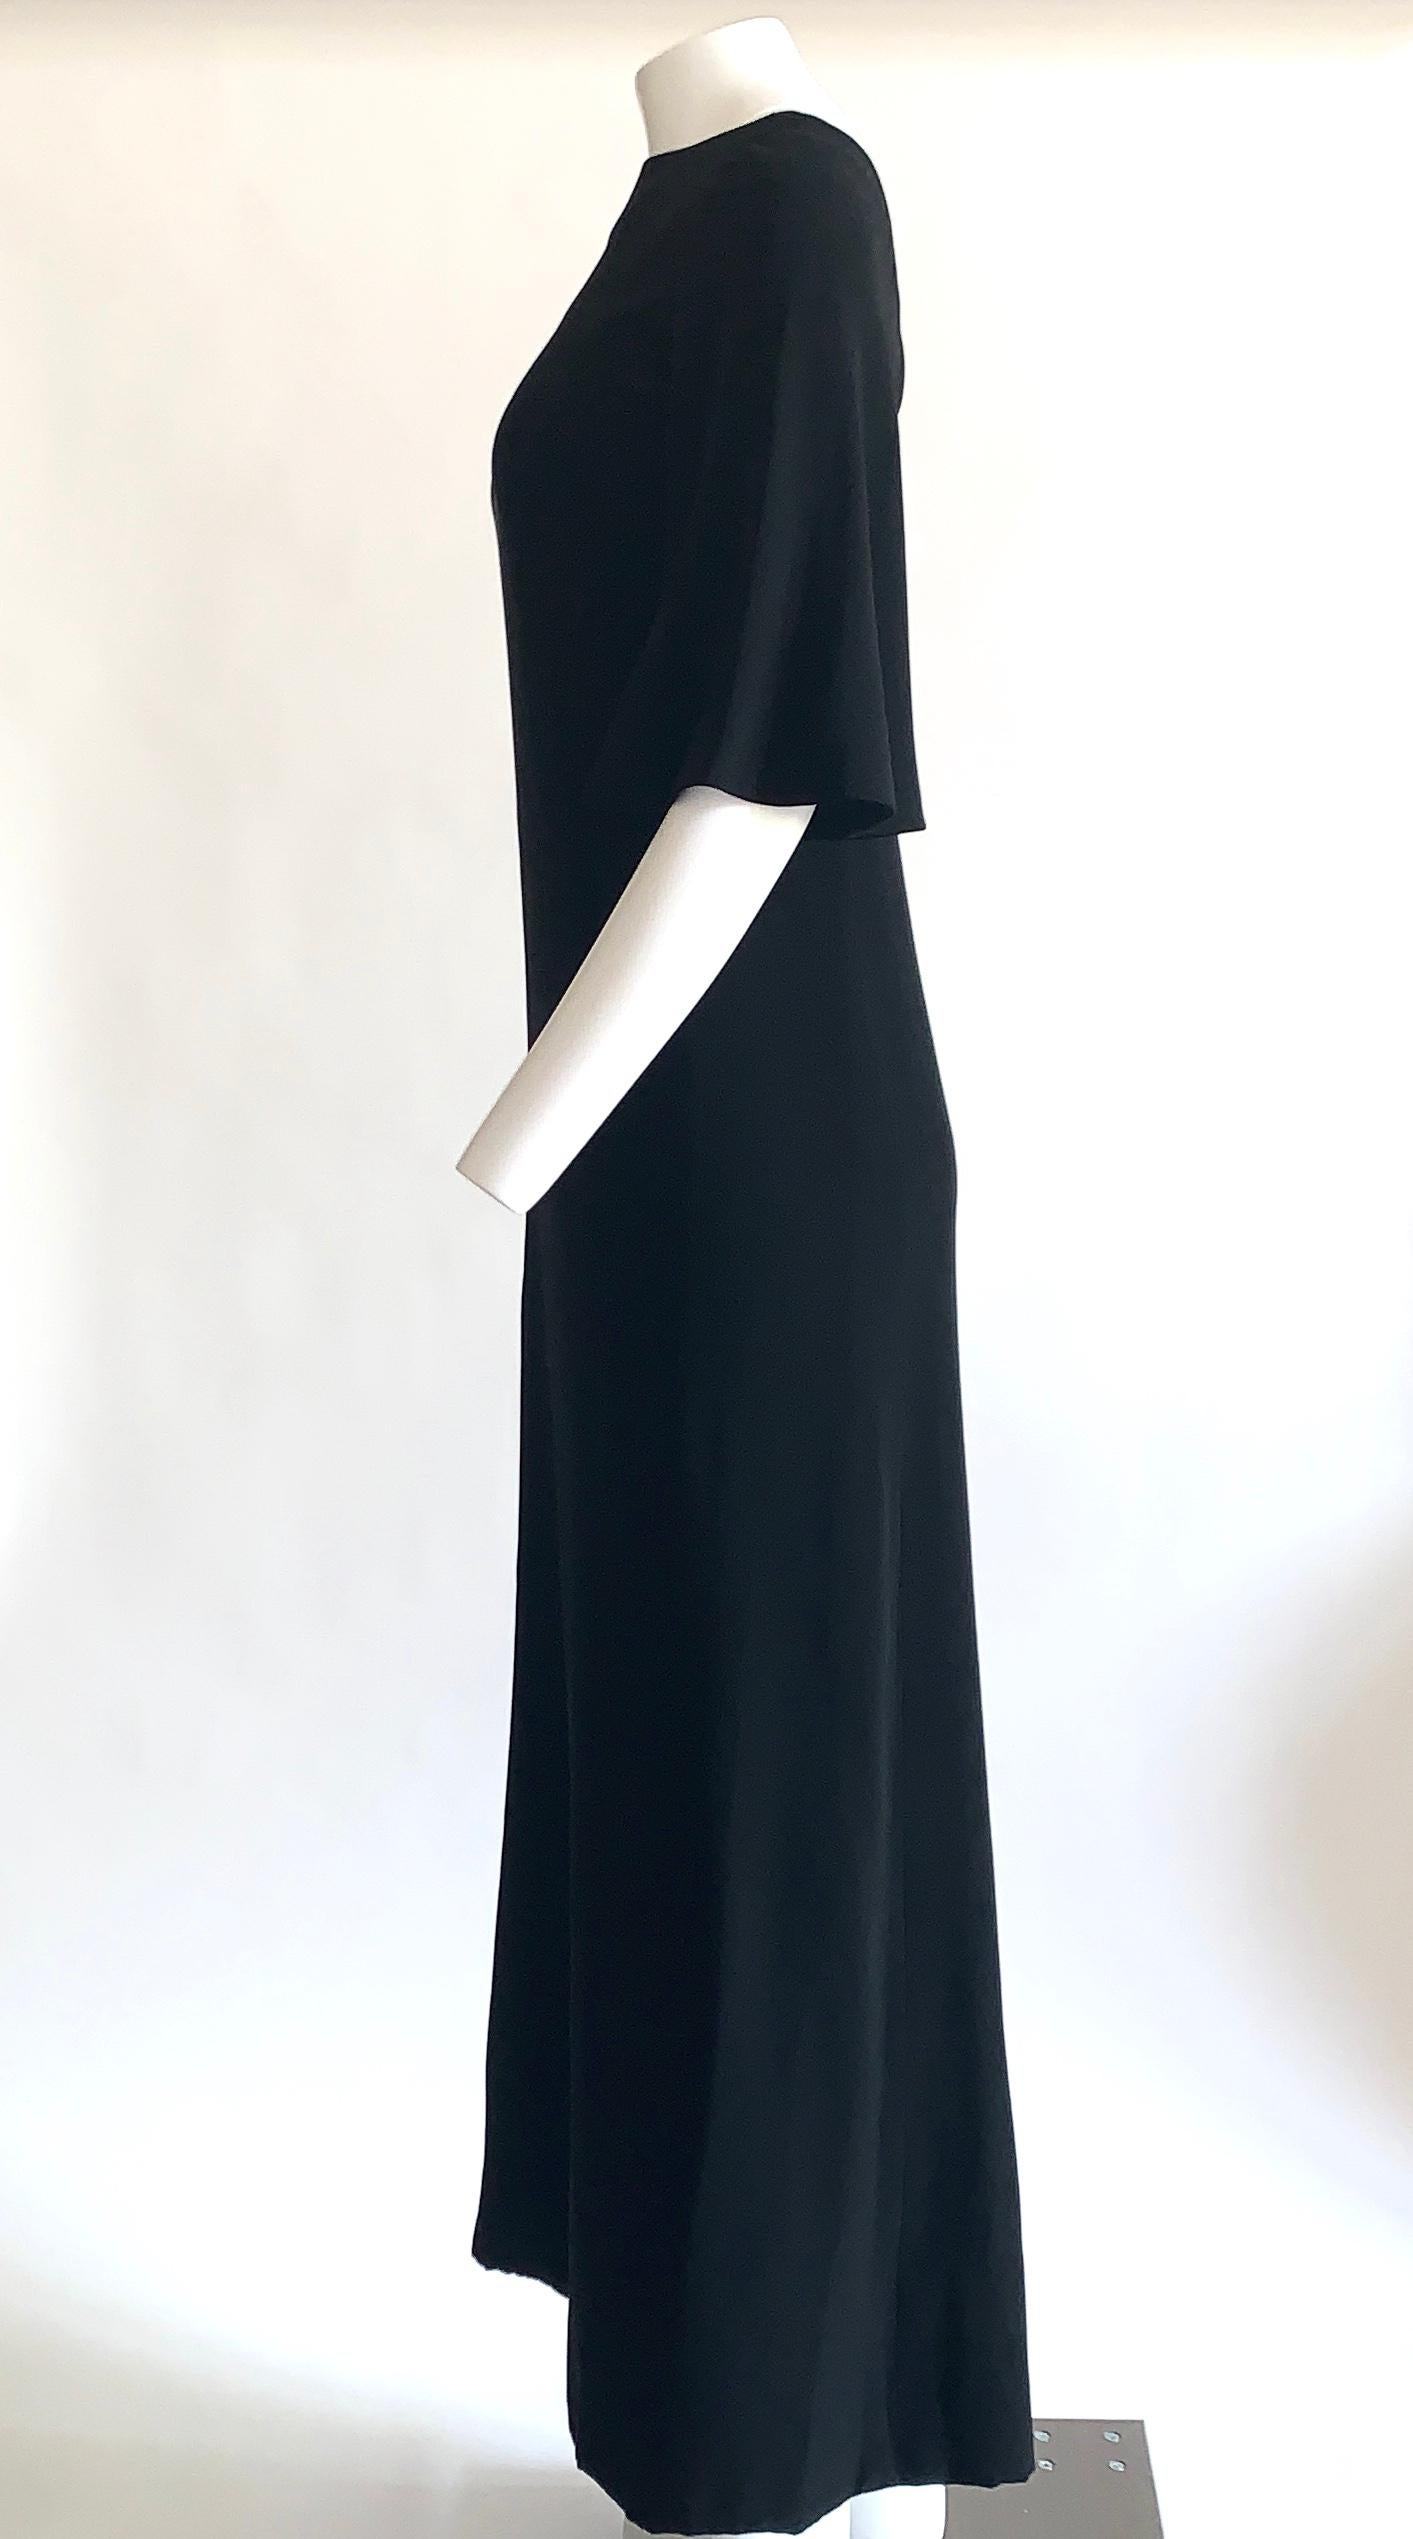 Vintage Norman Norell 1960s black silk maxi dress with scoop back and flared mid-length sleeve. A special piece that manages to be both iconically 60s in design but also completely modern. Emanates fun funky vibes when paired with acrylic jewelry,